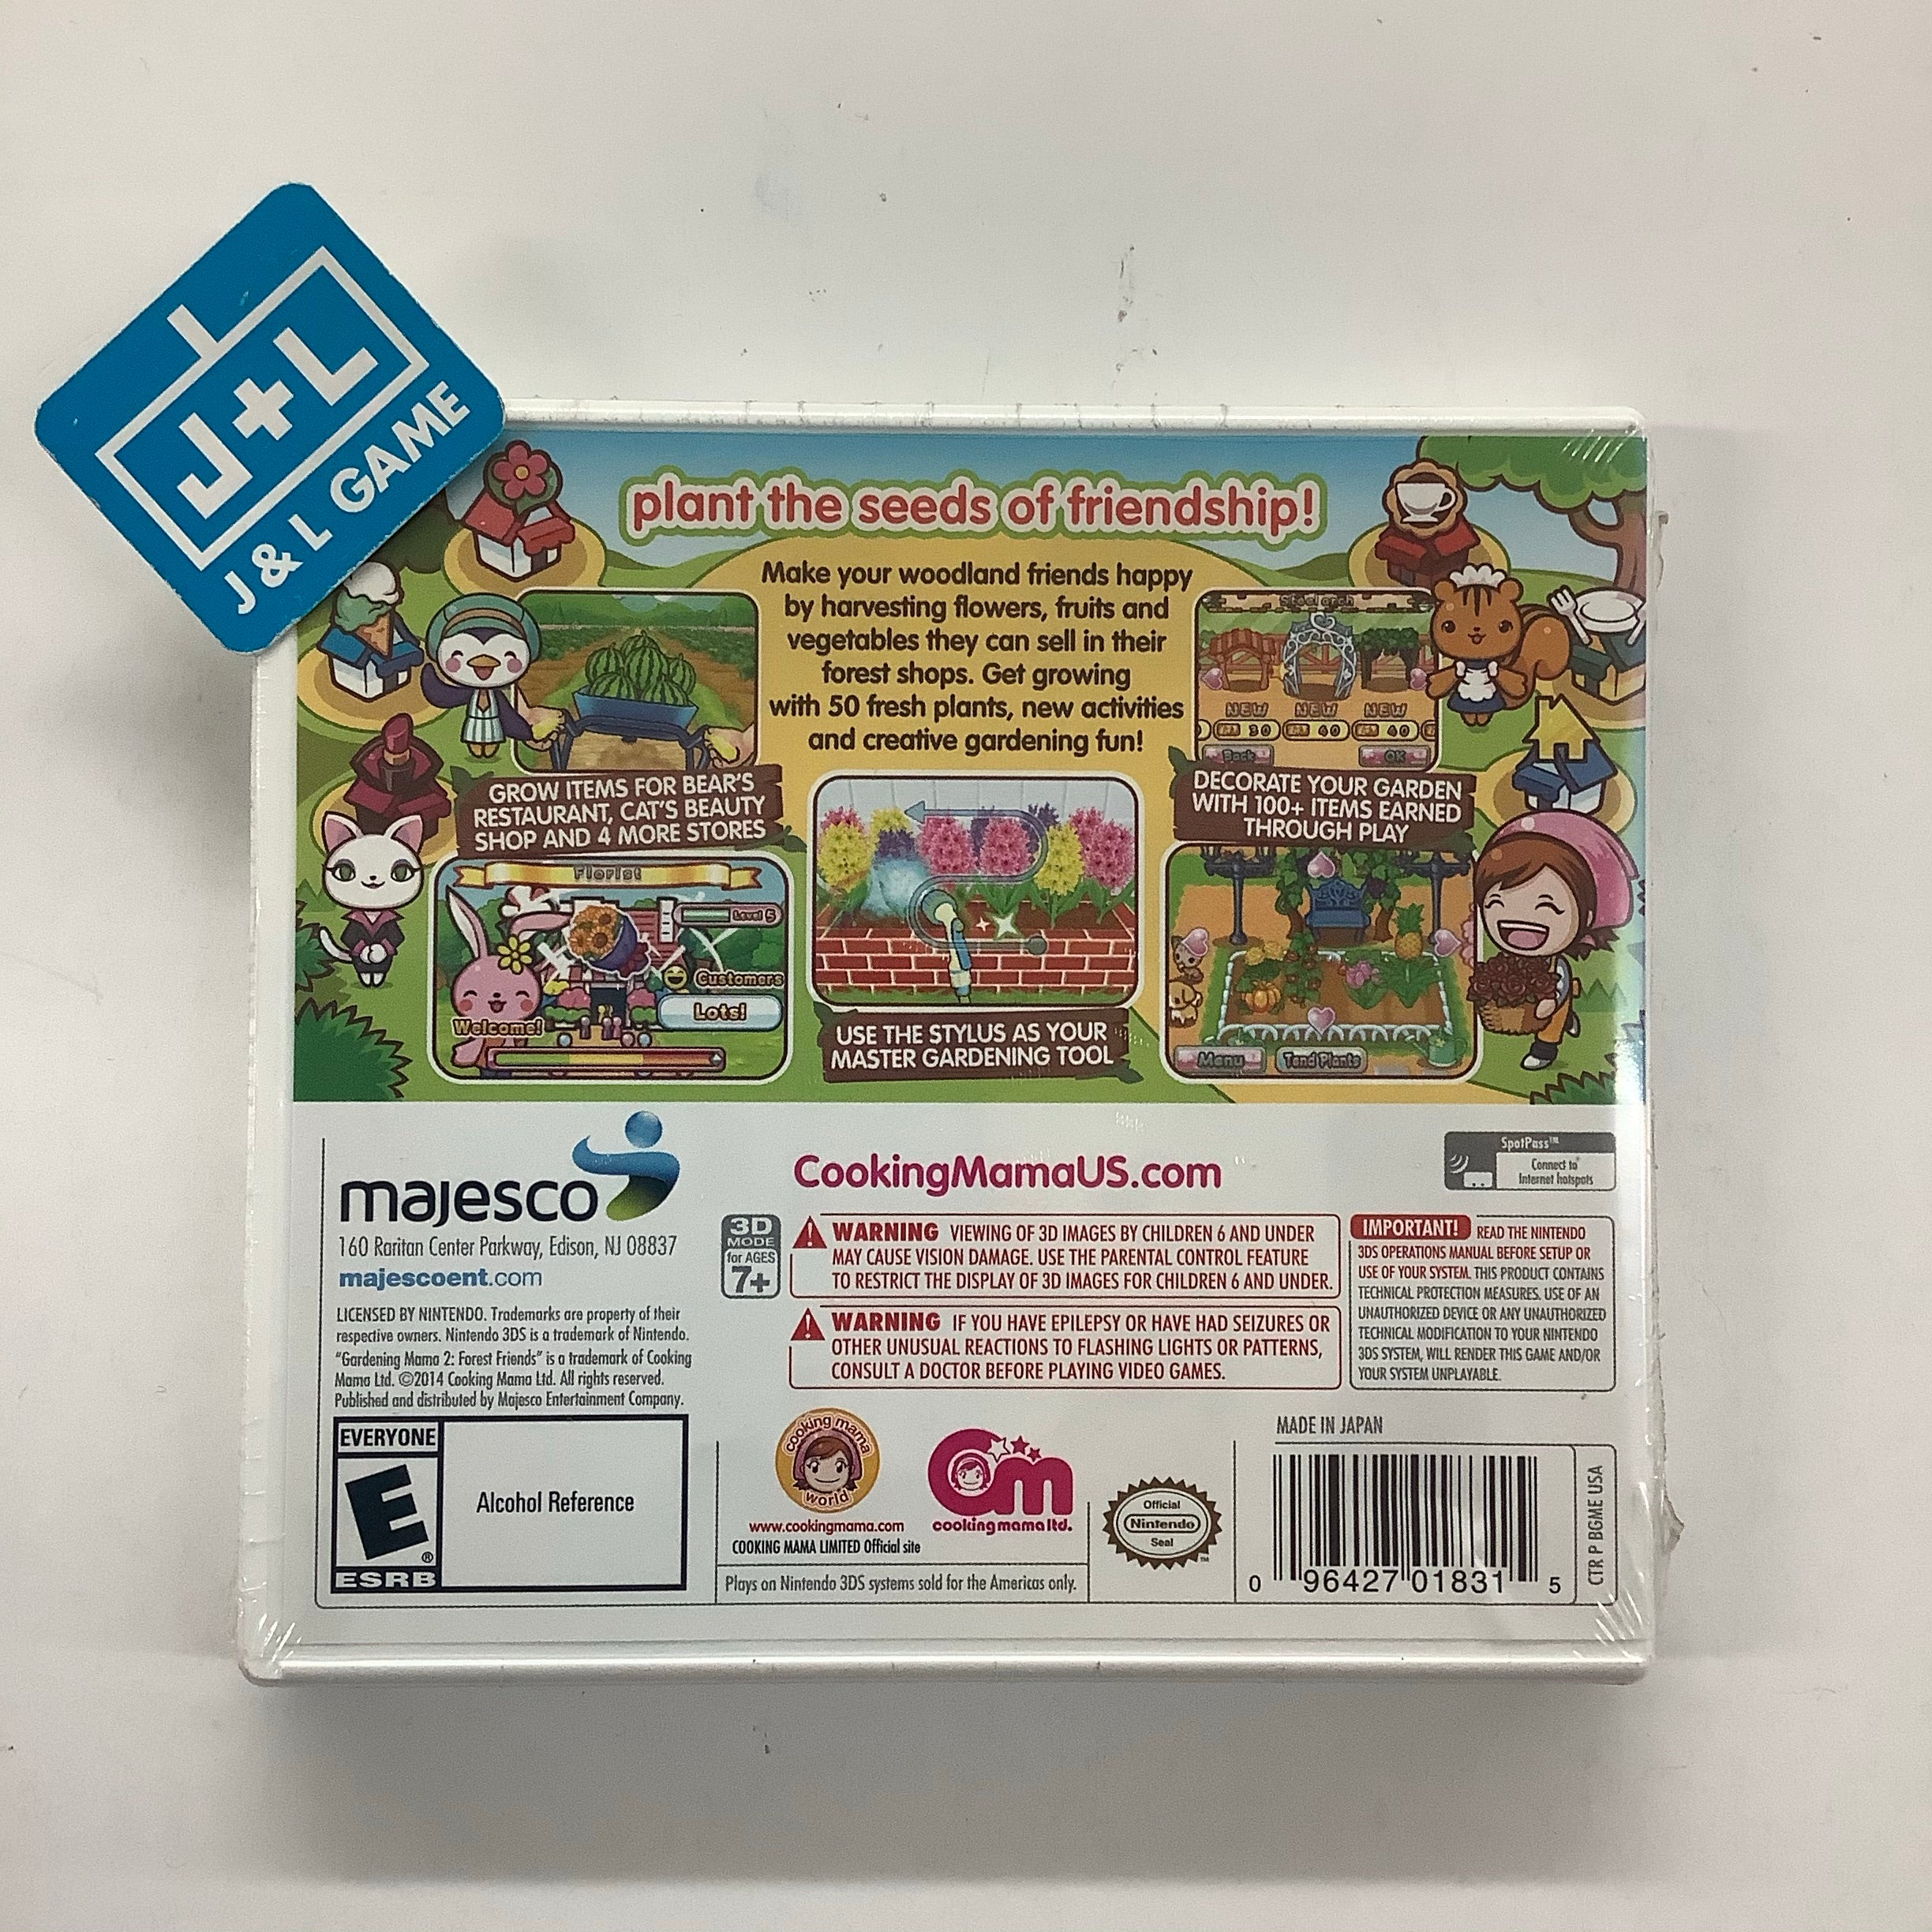 Gardening Mama 2: Forest Friends - Nintendo 3DS Video Games Majesco   